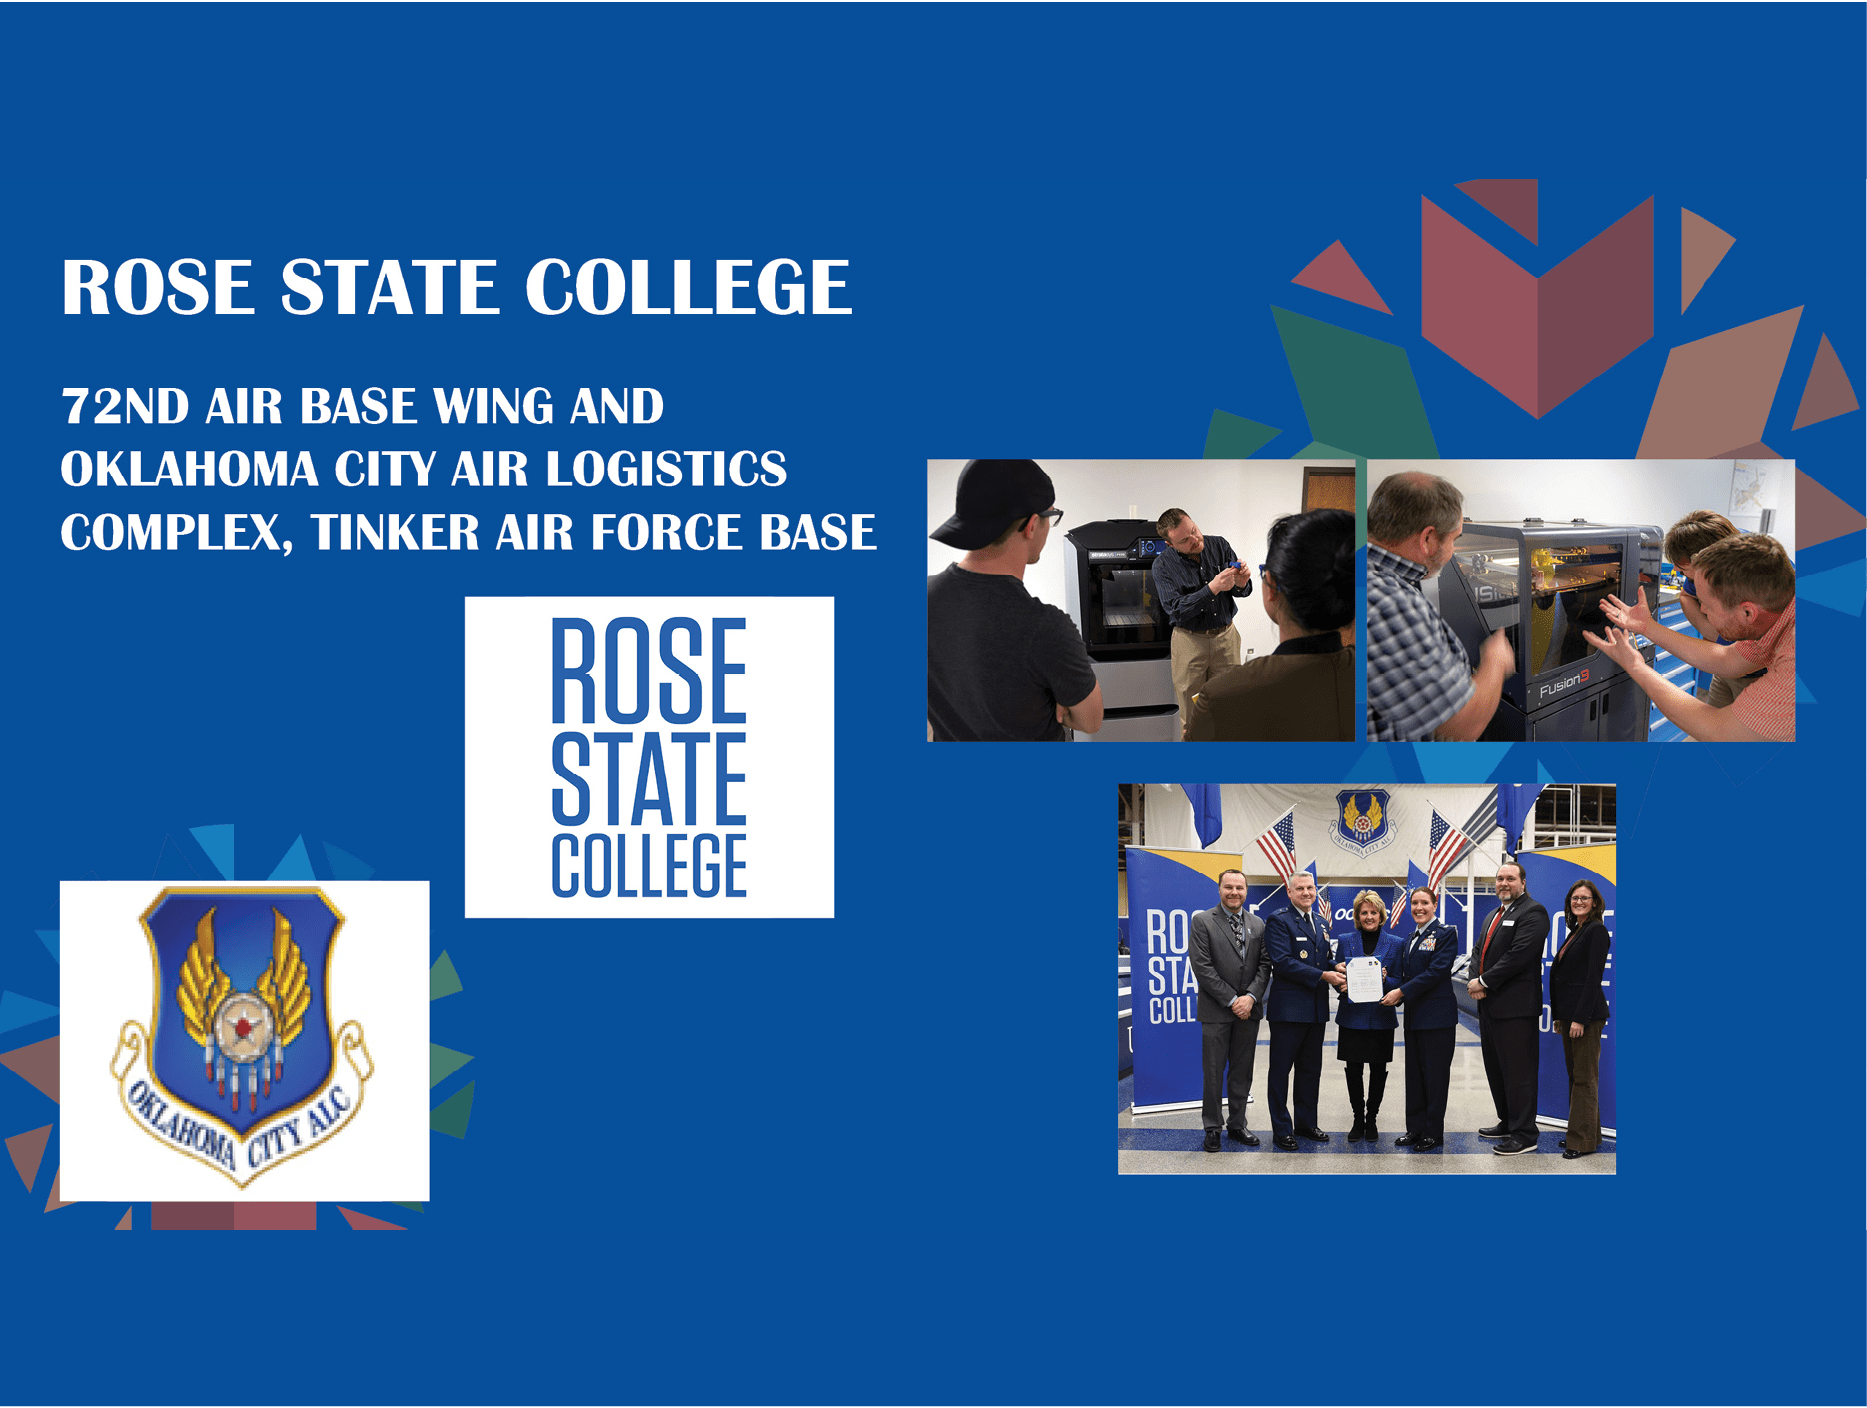 Rose State College, 72nd Air Base Wing and Oklahoma City Air Logistics Complex, Tinker Air Force Base